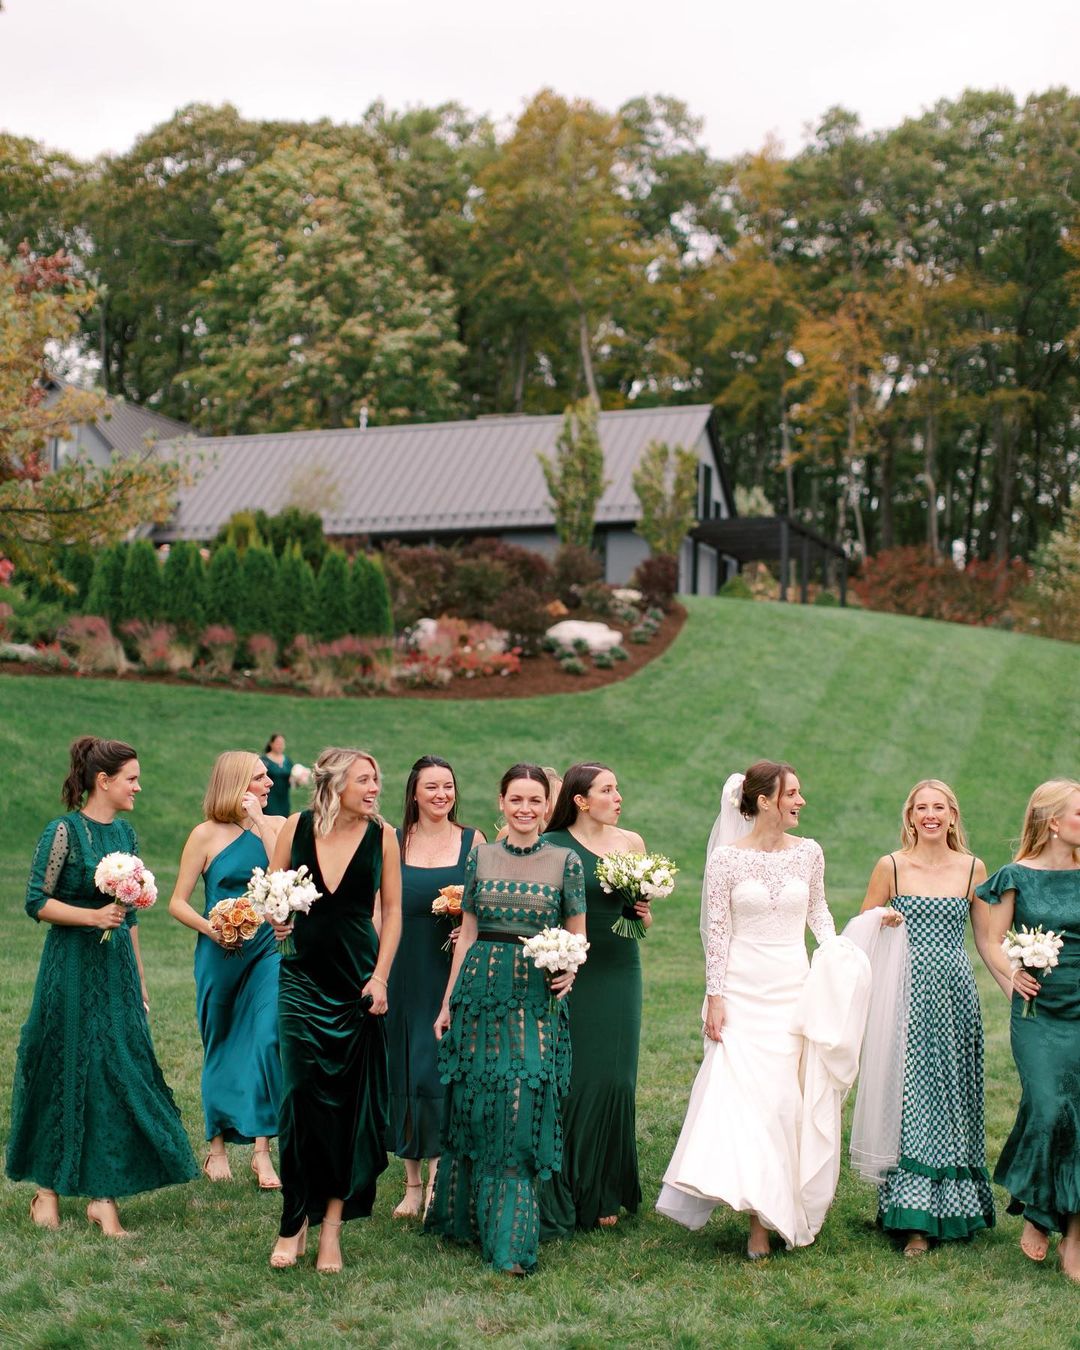 What To Wear To A Fall Wedding: 56 Outfit Ideas To Try For Your